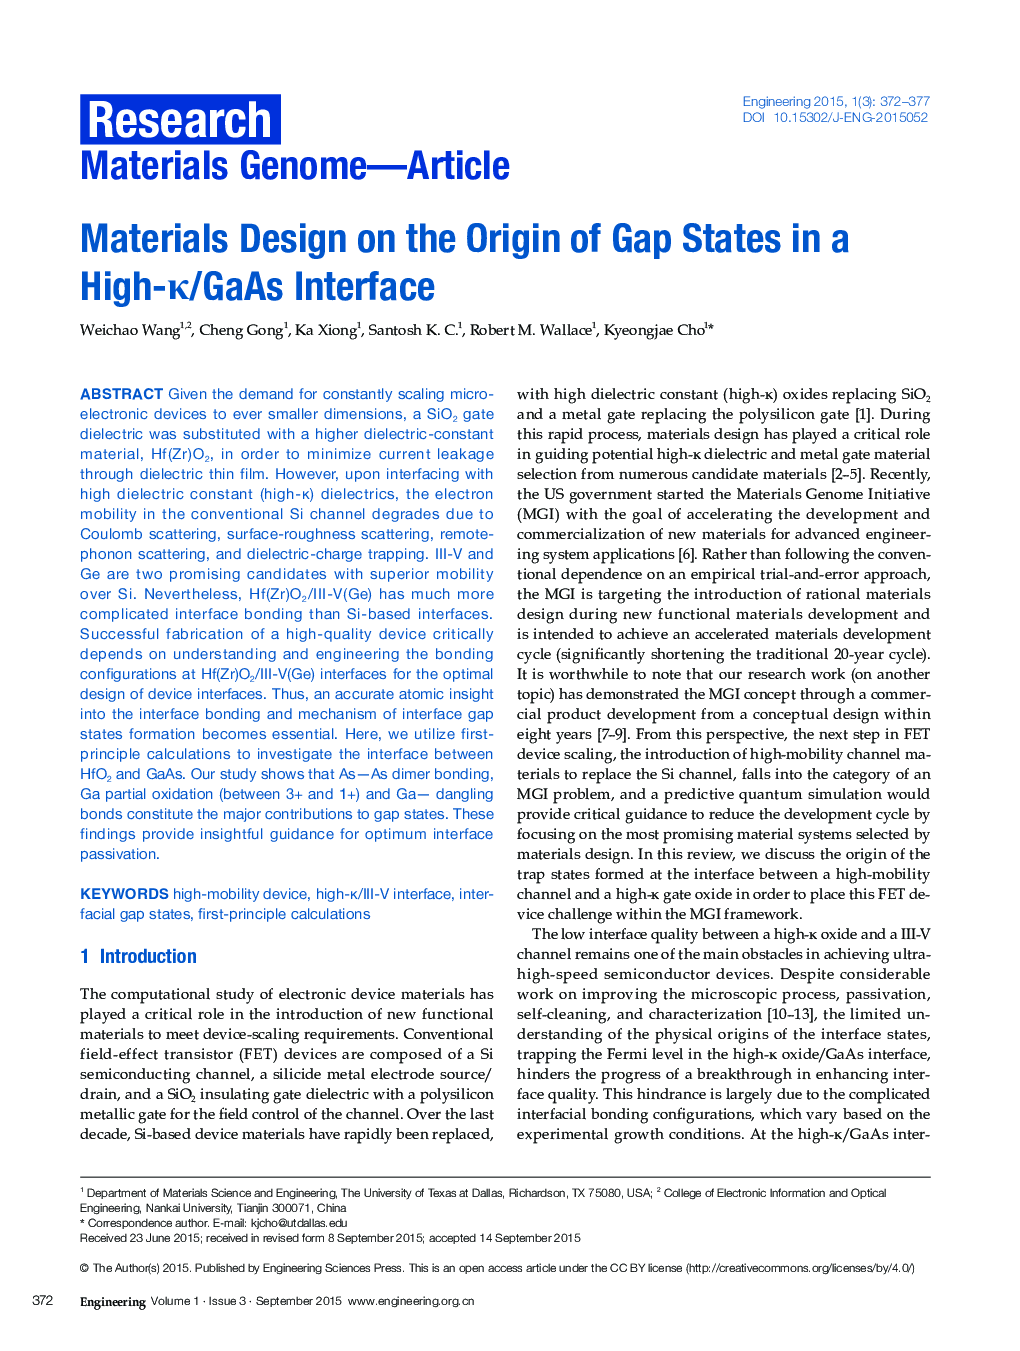 Materials Design on the Origin of Gap States in a High-κ/GaAs Interface